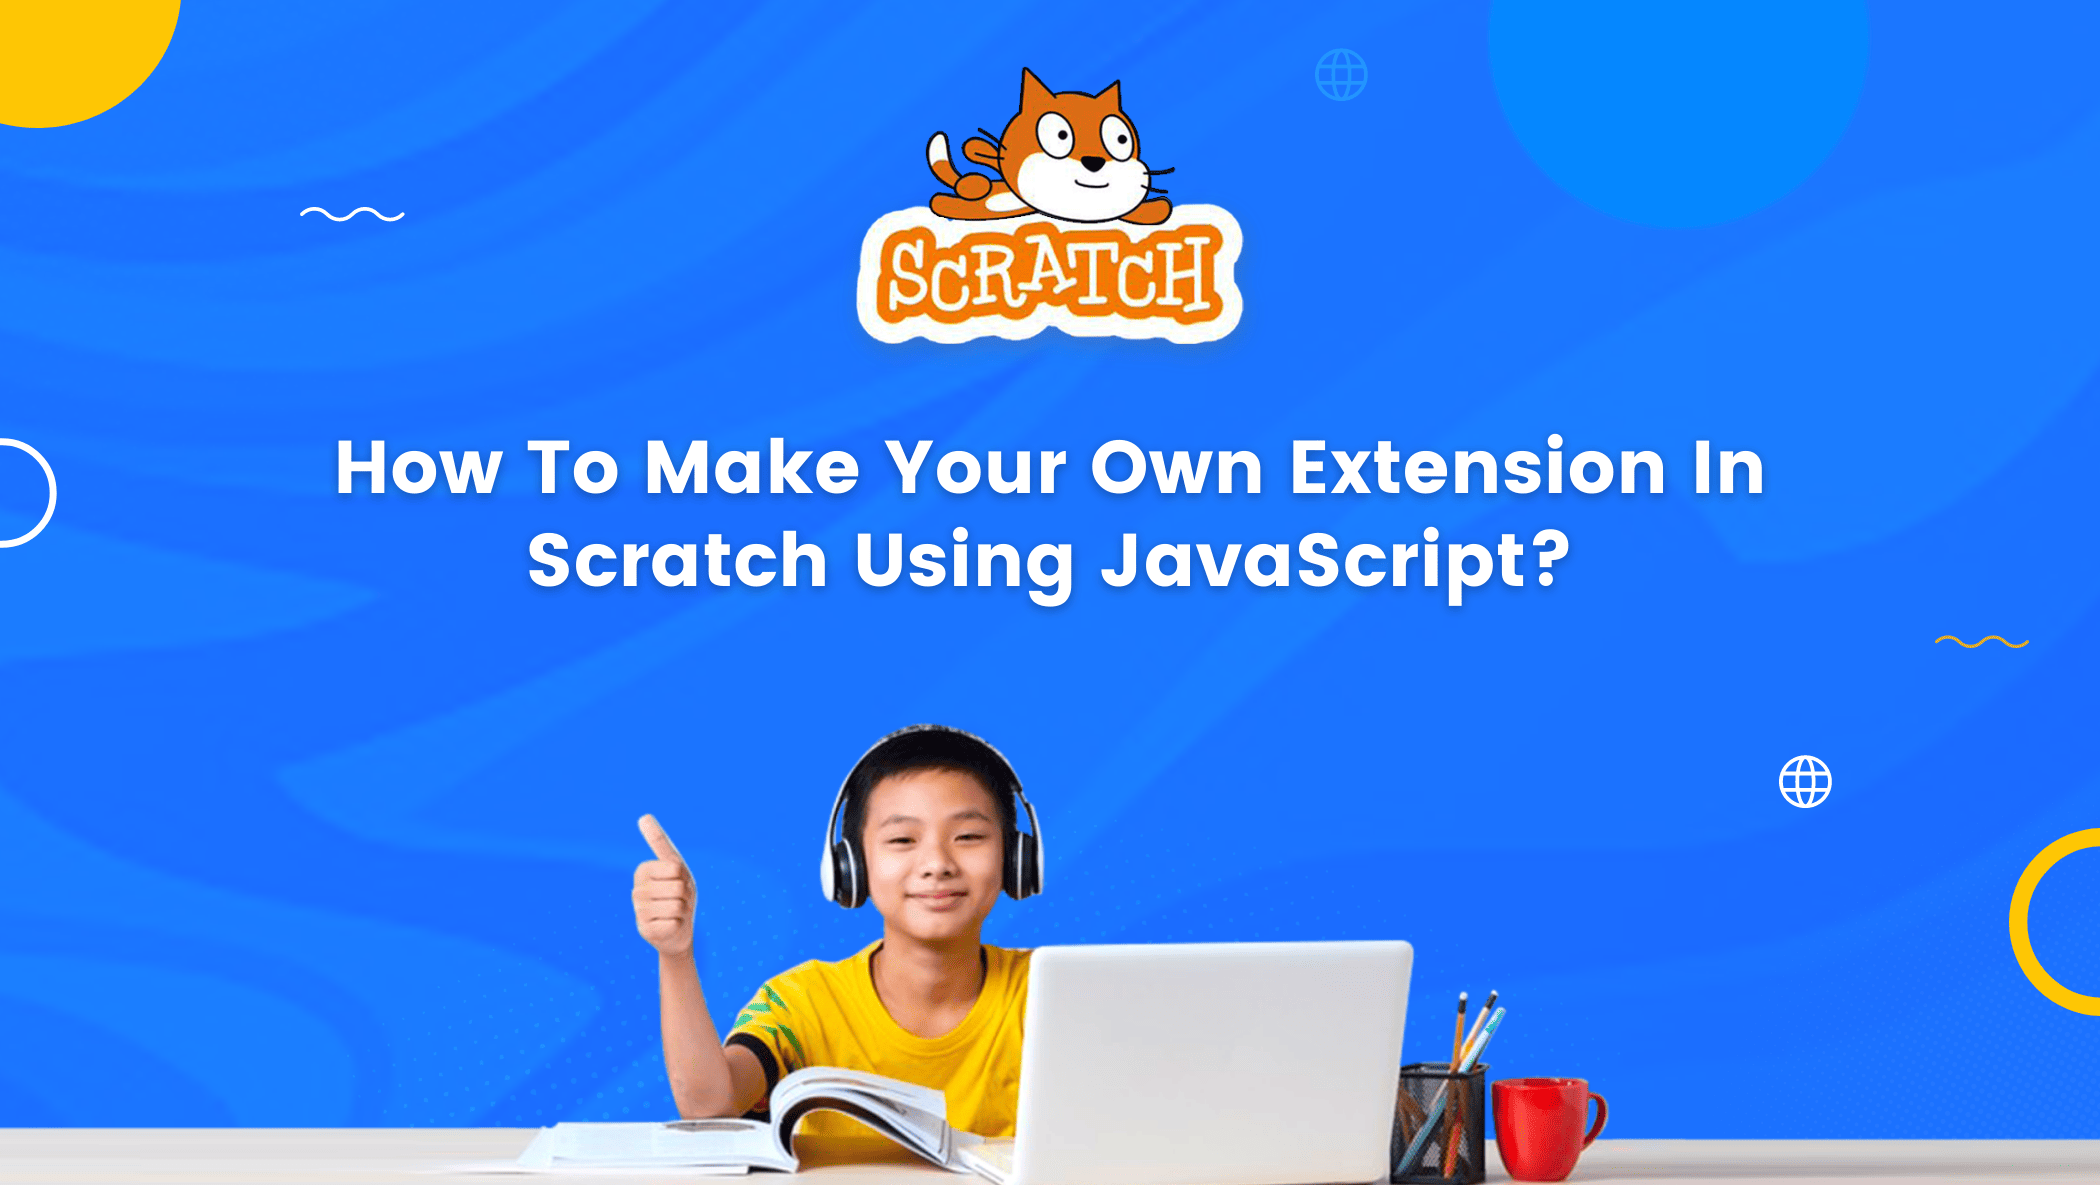 How To Make Your Own Extension In Scratch Using JavaScript